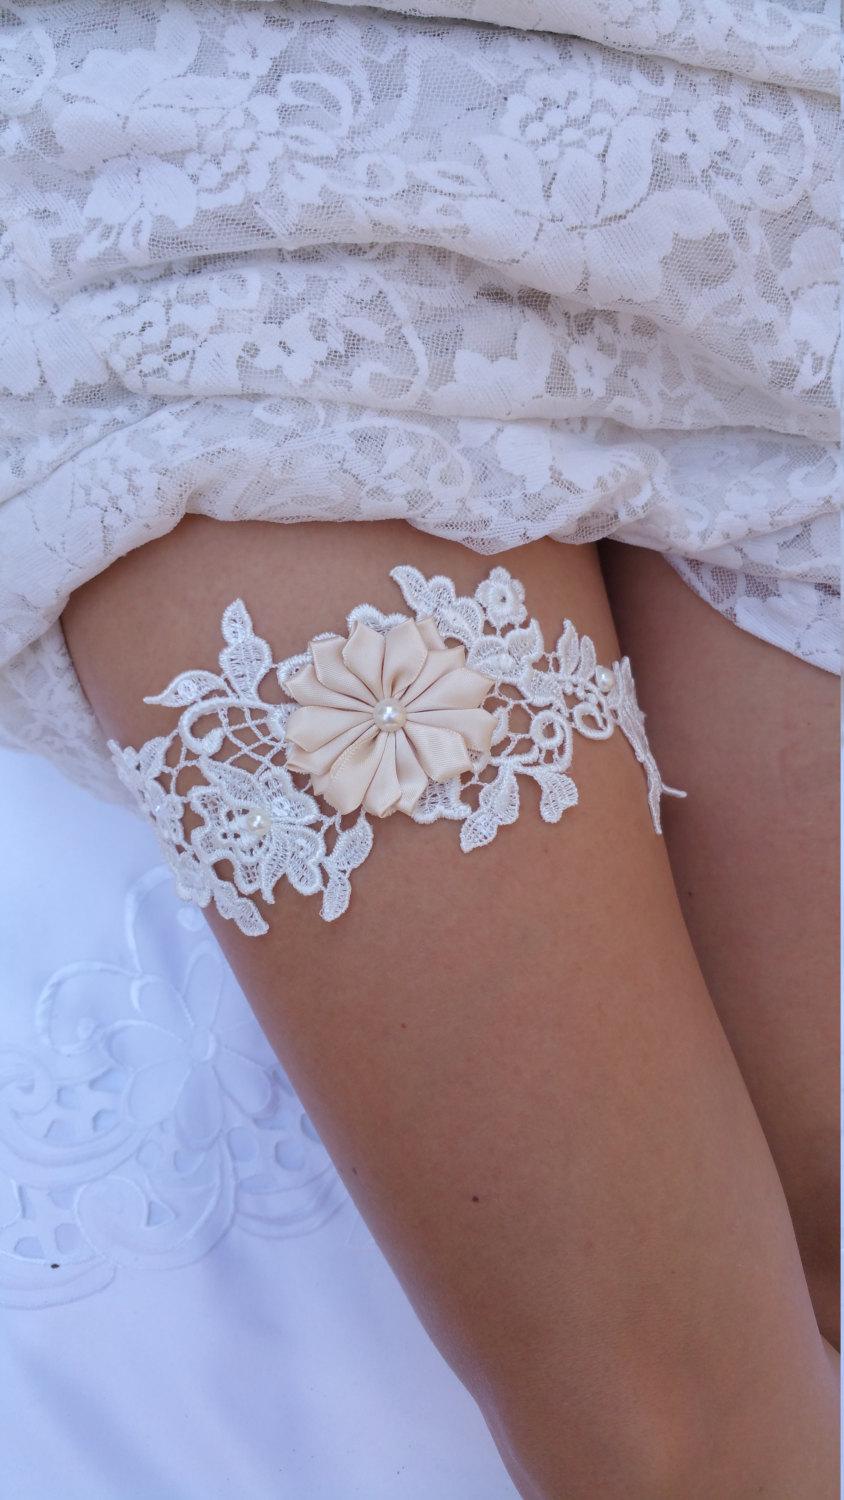 Wedding  Lace Garter WhiteIvory  Embroidered  Lace Garter Set Wedding Garter Ivory  White Bridal Garter